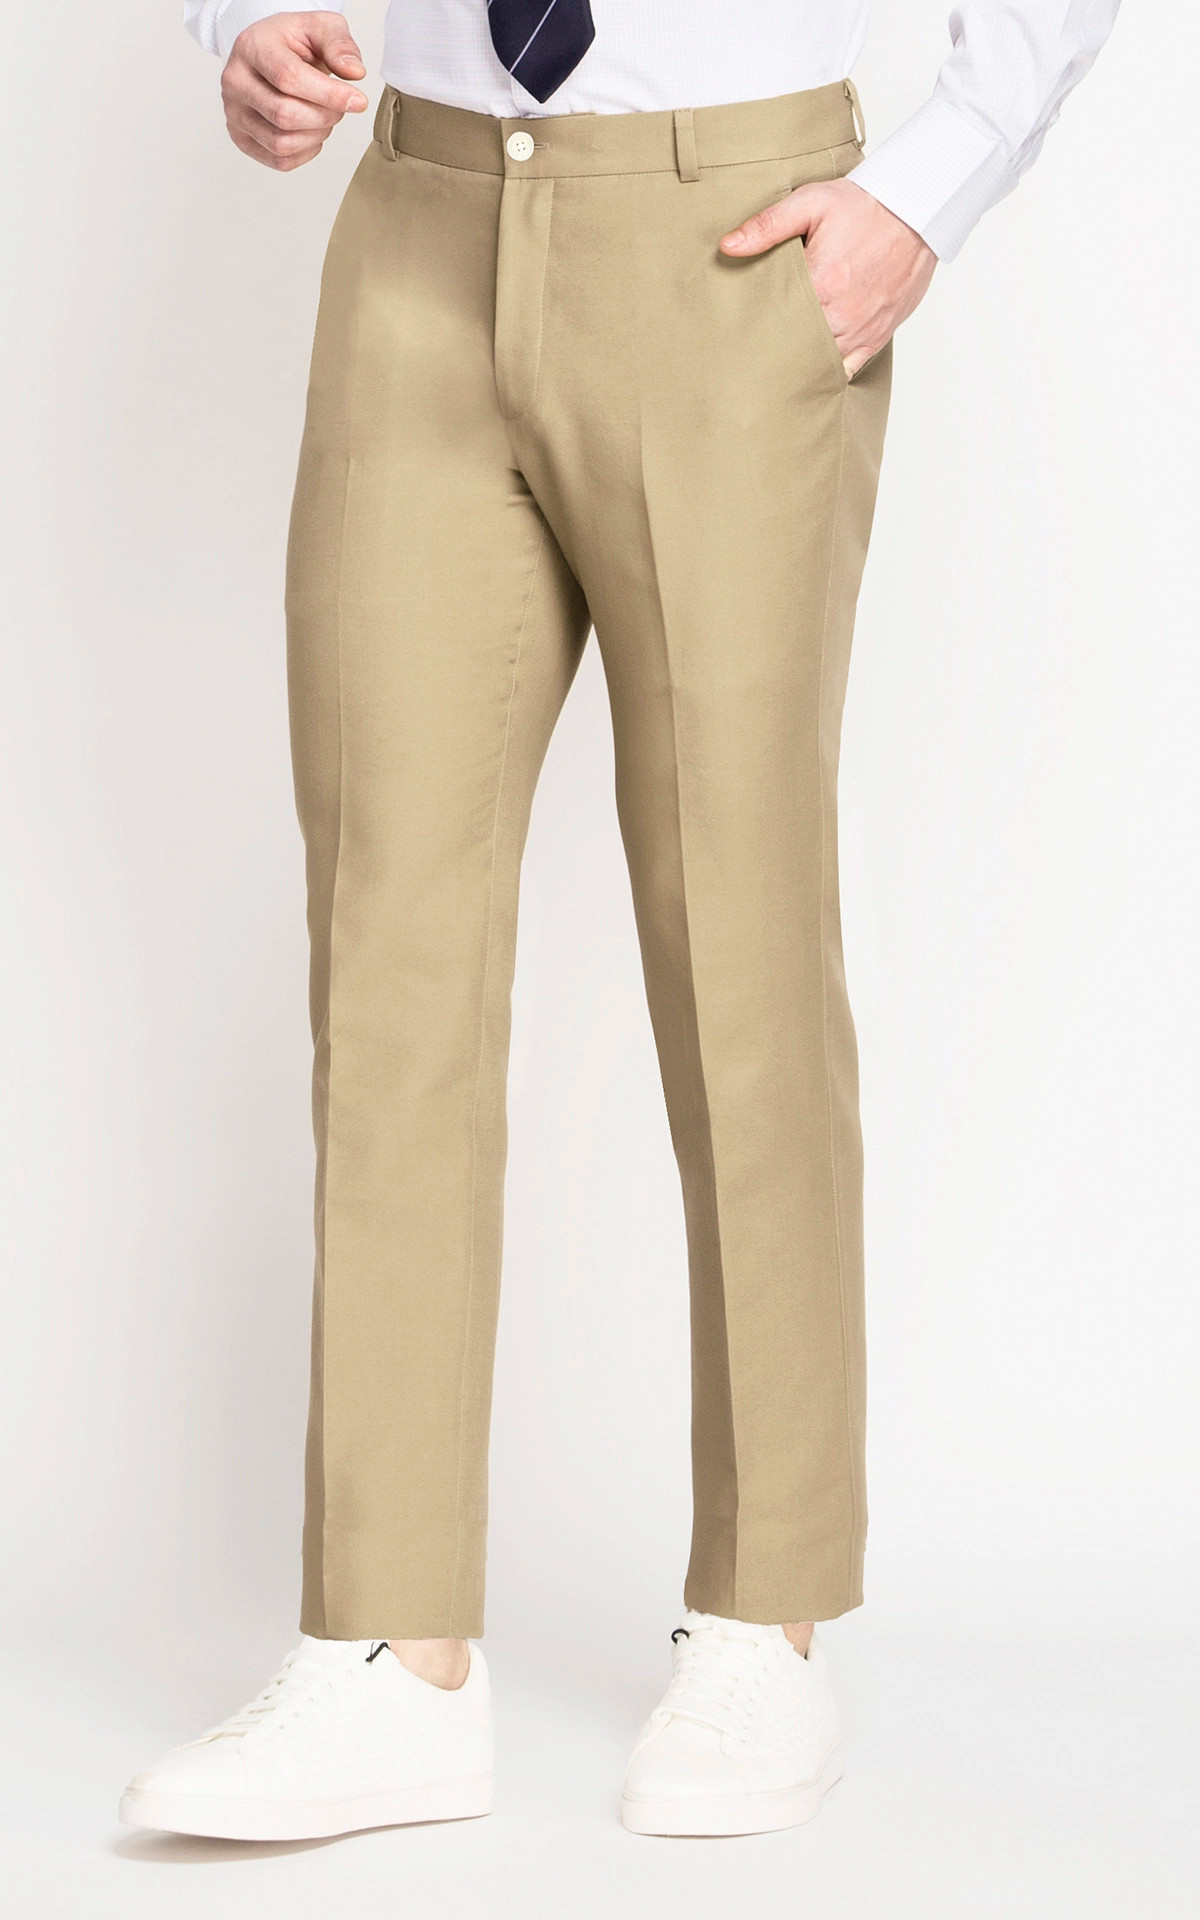 Sophisticated Company Sage Green Straight Leg Trouser Pants